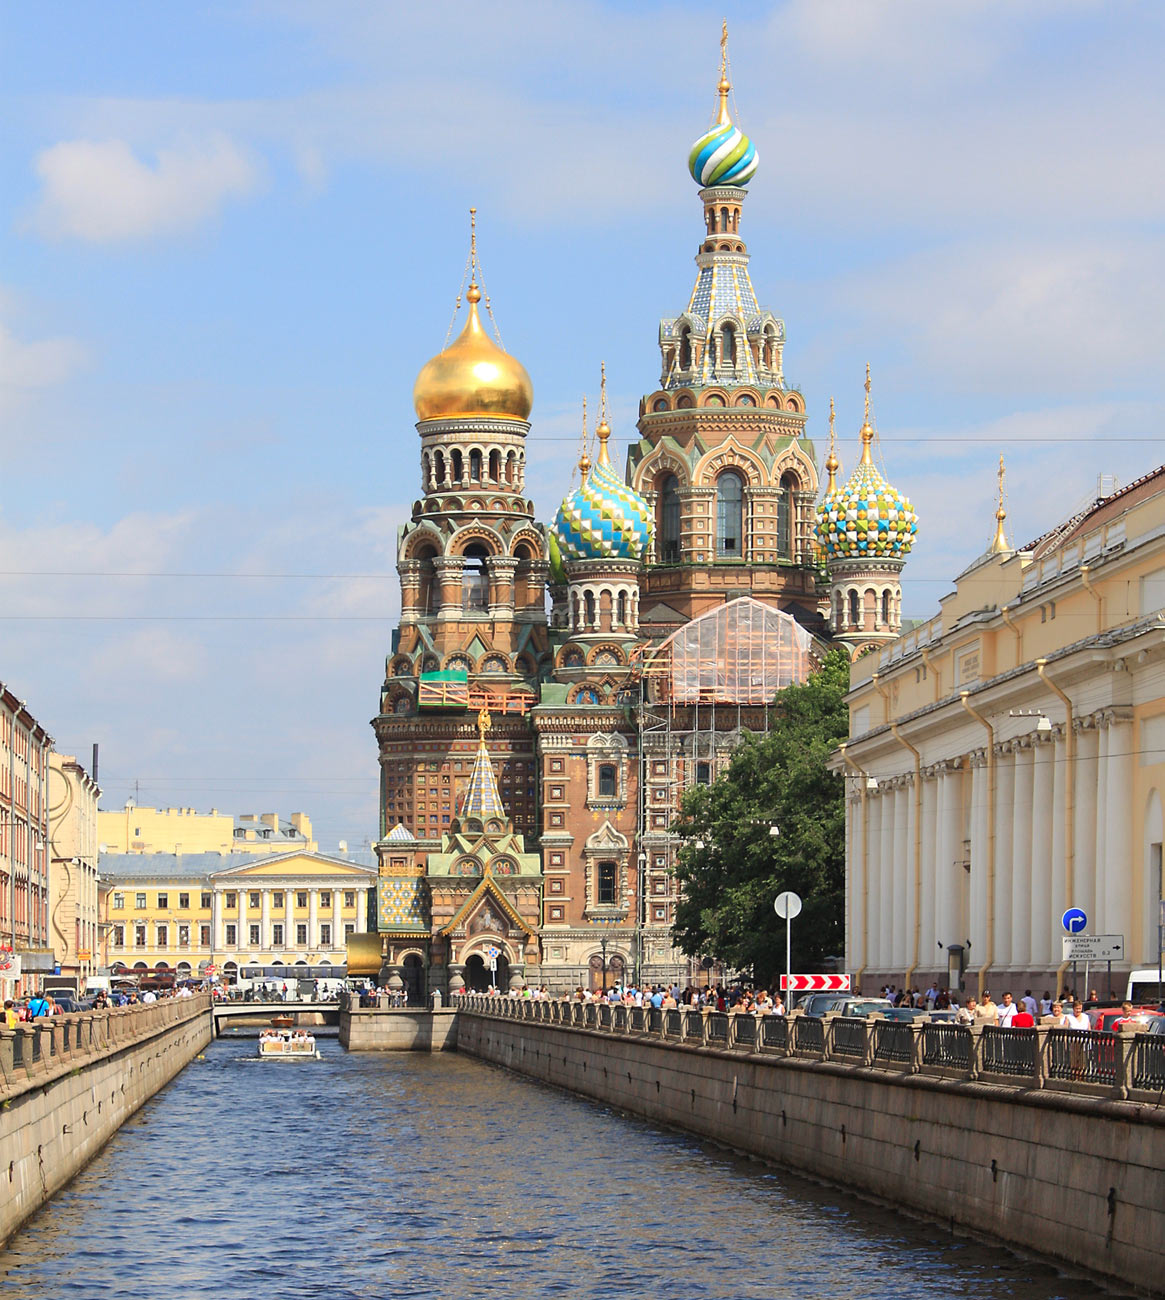 Church on Spilt Blood and Griboyedov Canal in St. Petersburg, Russia